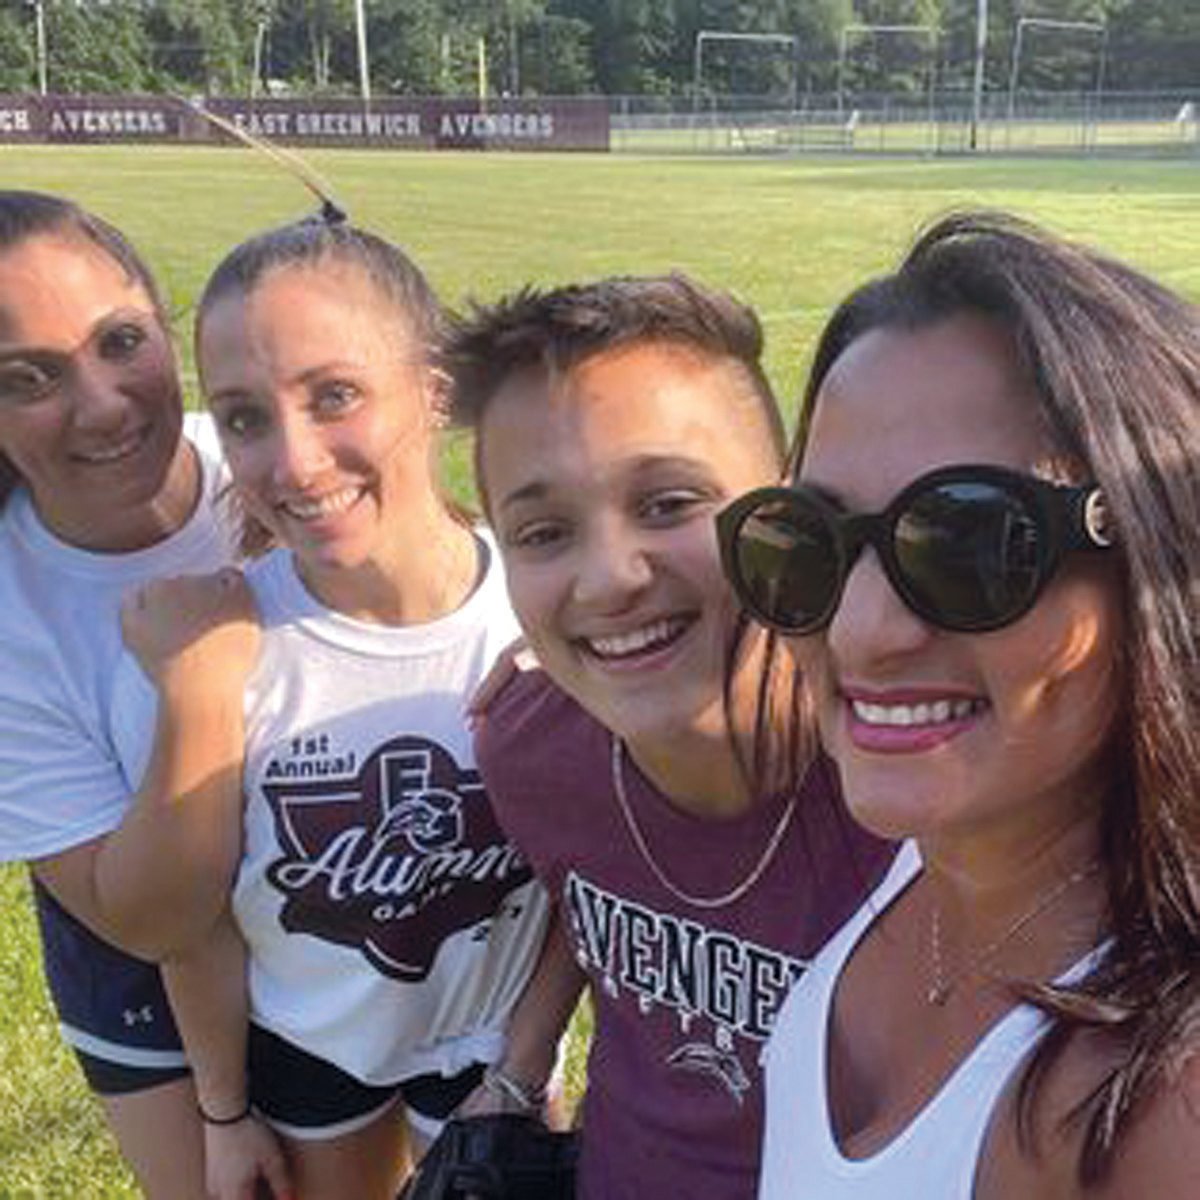 Janine Passaretti-Molloy (right), posed for a photo with her three daughters, Olivia, Victoria and Jackie Passaretti, during an alumni softball game.